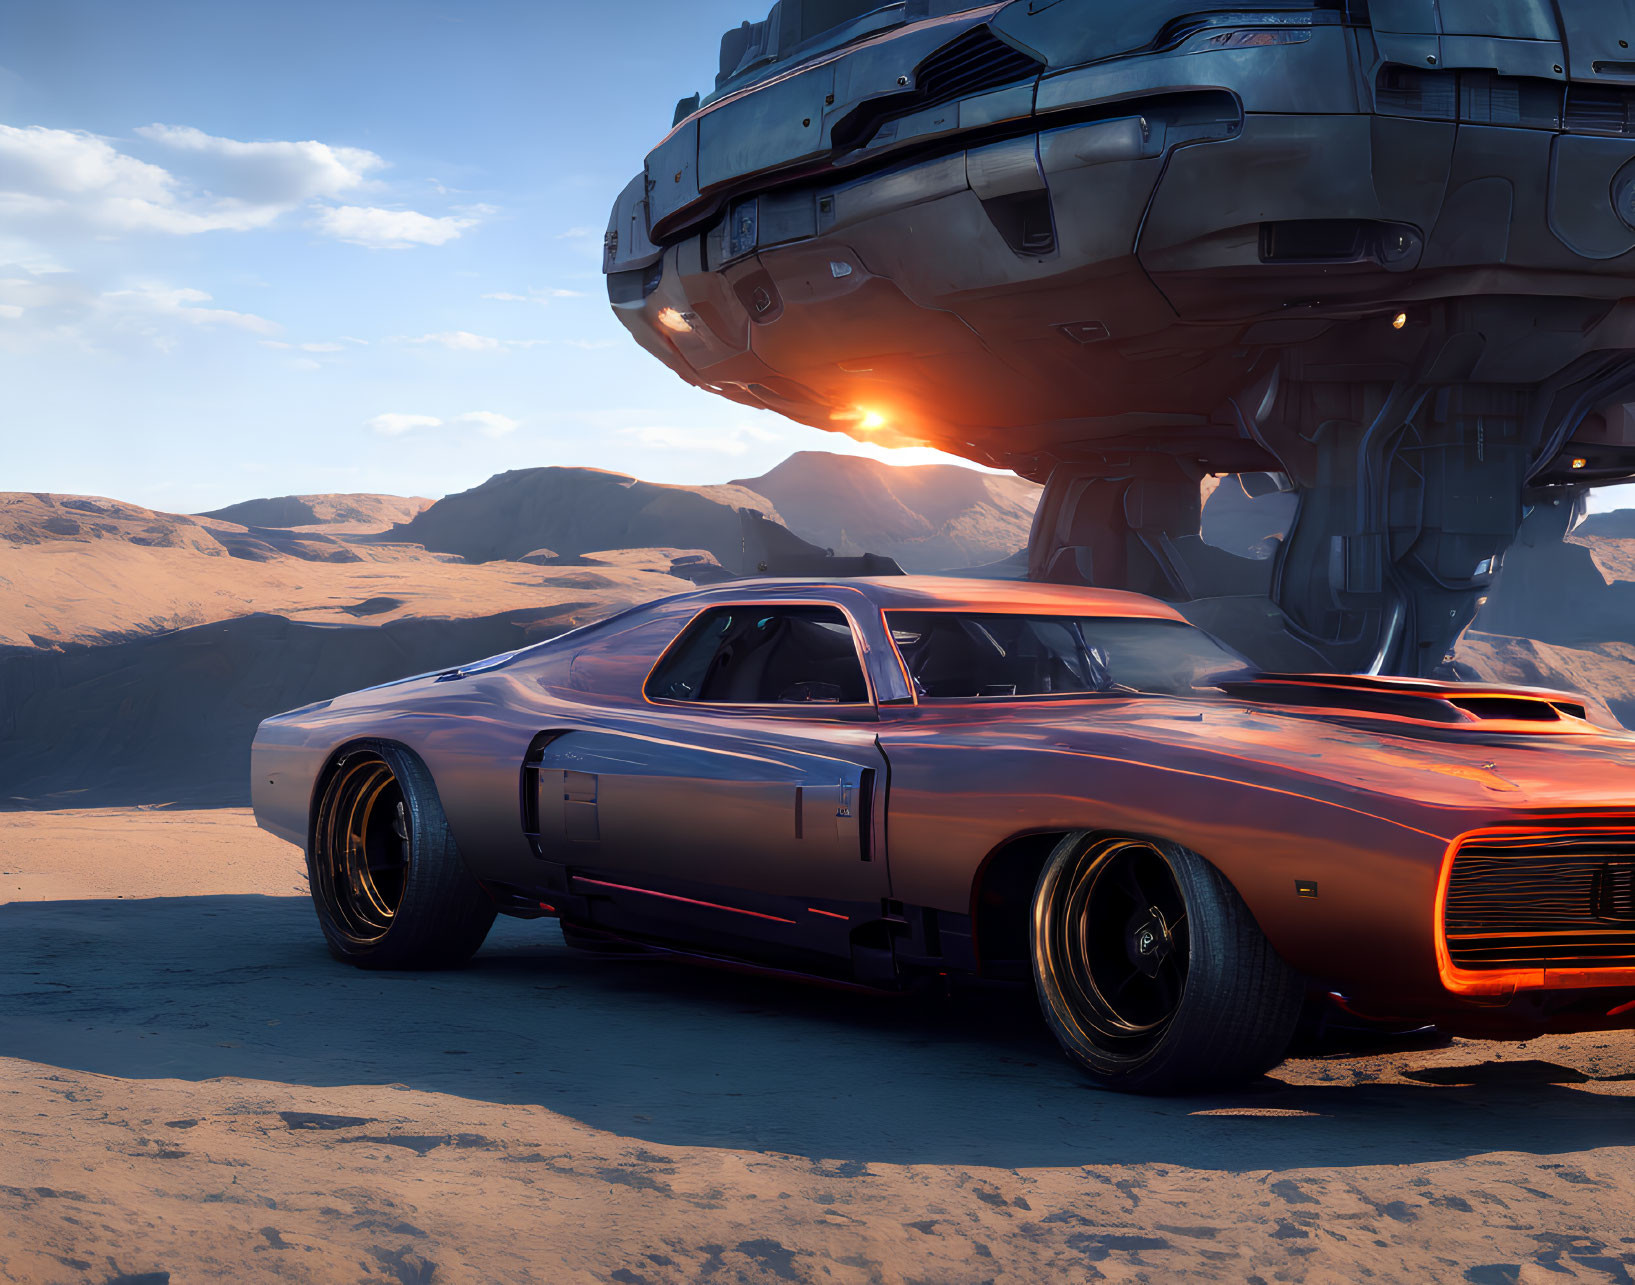 Reflective muscle car parked under futuristic spaceship in desert sunset